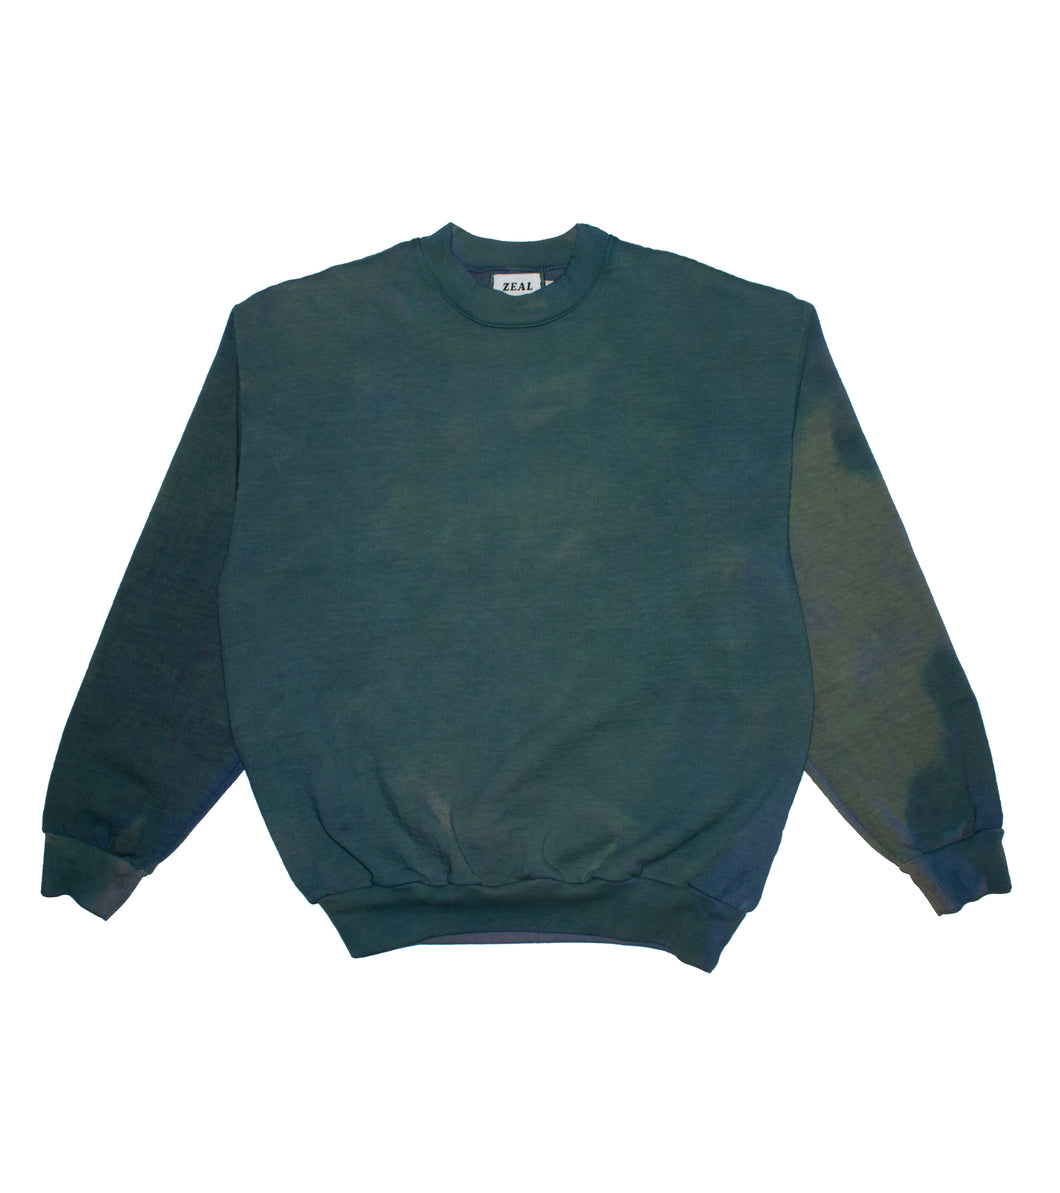 Hand Dyed Multi Color Crewneck - Large